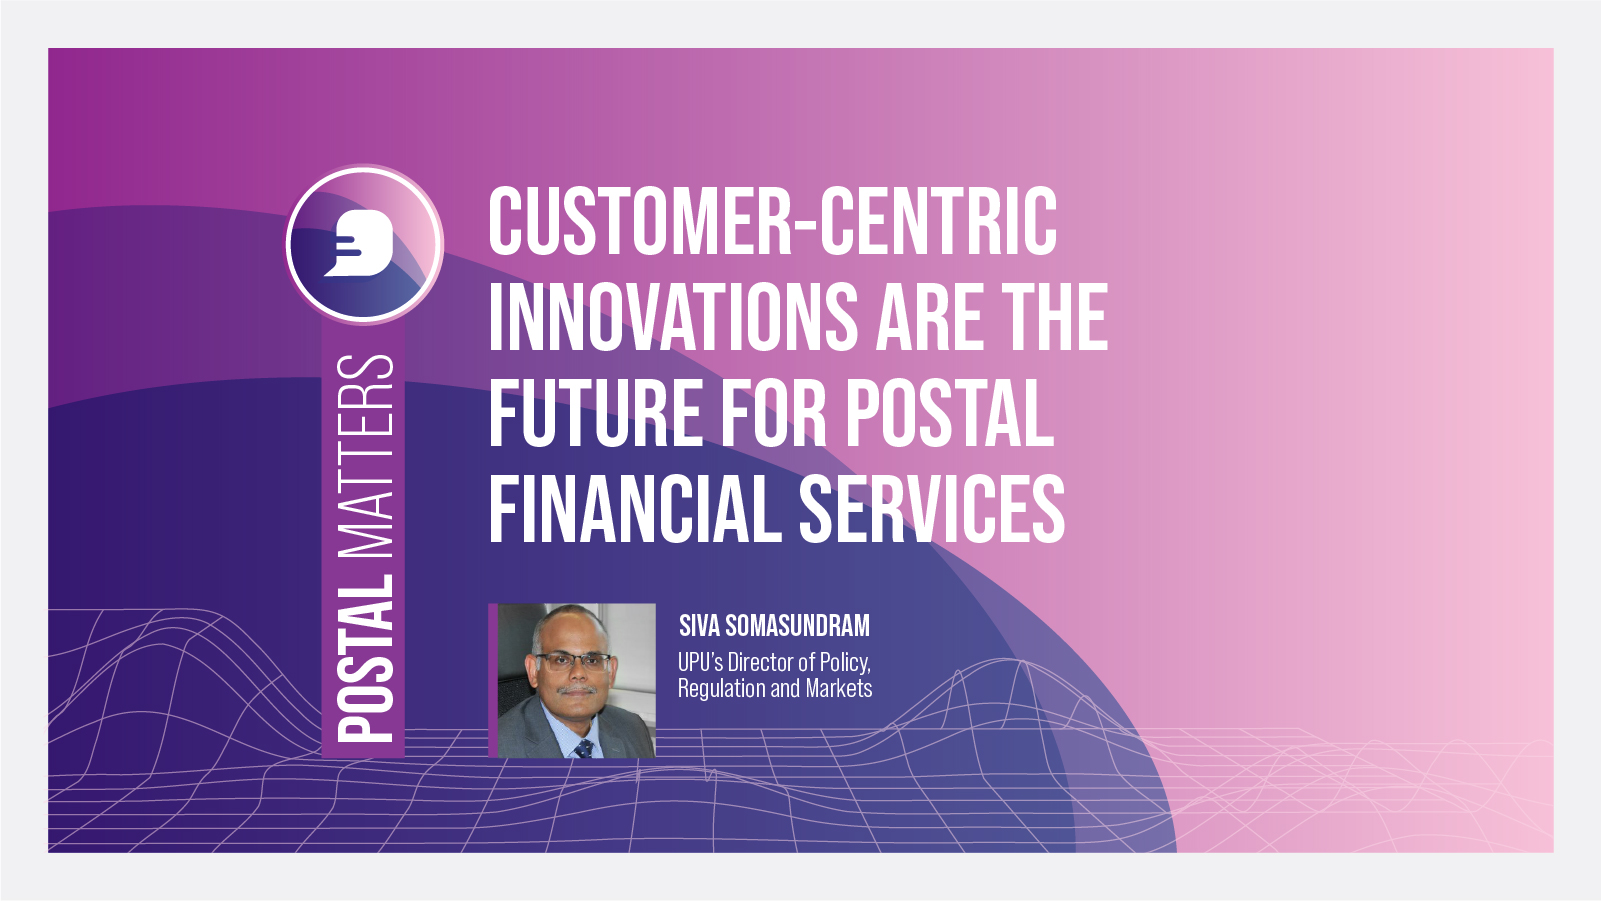 Customer-centric innovations are the future for postal financial services